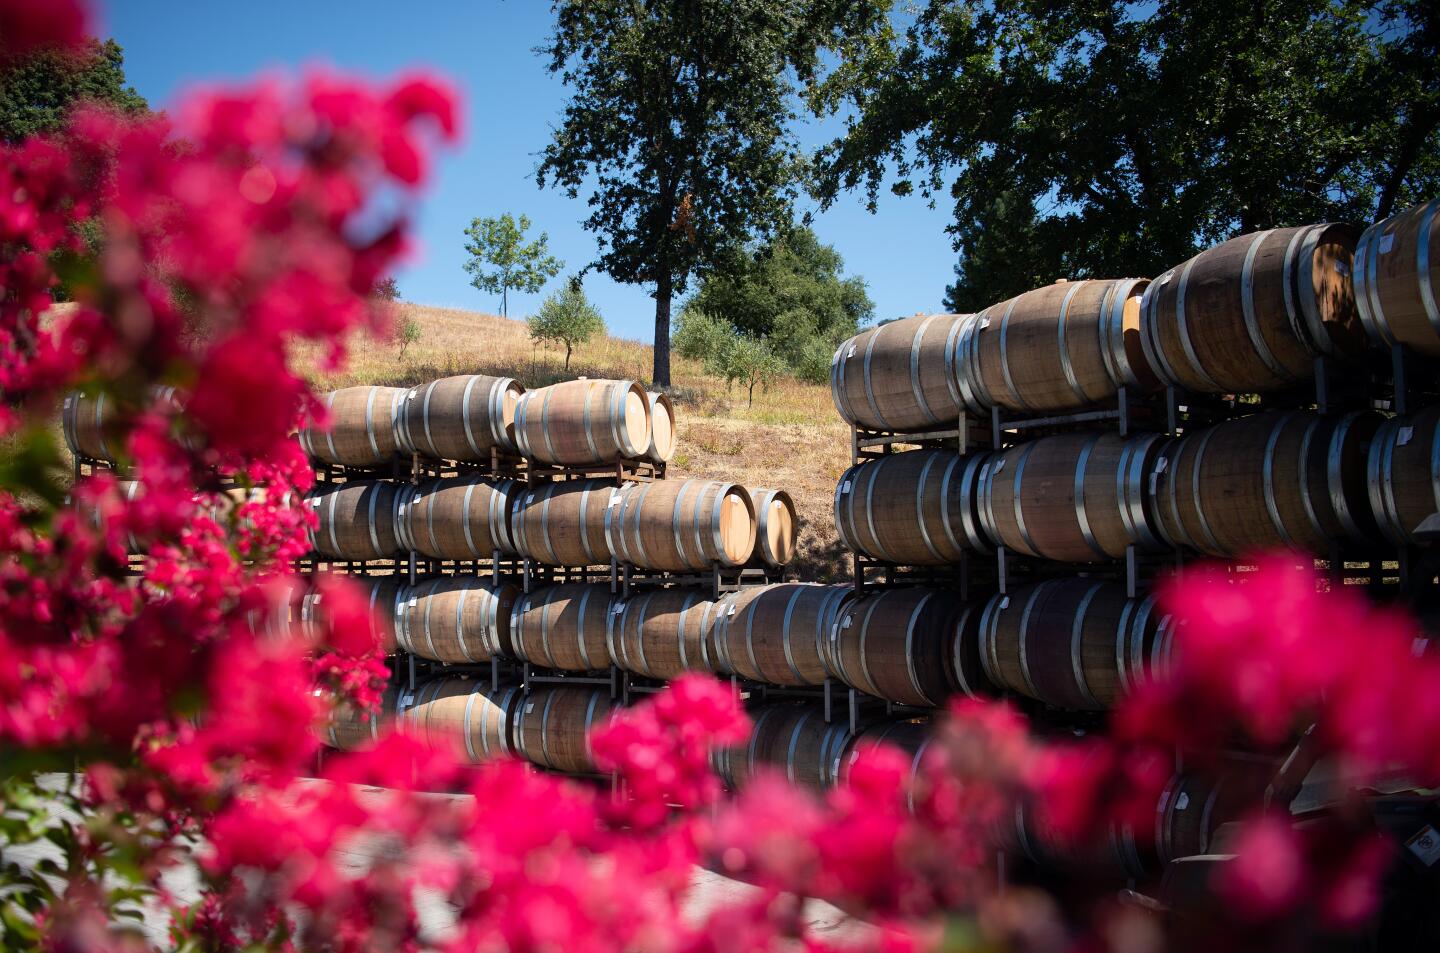 Barrels of wine are stacked at Alexander Valley Vineyards. Costco, which is opening its first store in China in Shanghai next week, bought 250 cases of Hank Wetzel’s wine. In June, while it was in transit, China imposed its latest tariff of 15%.